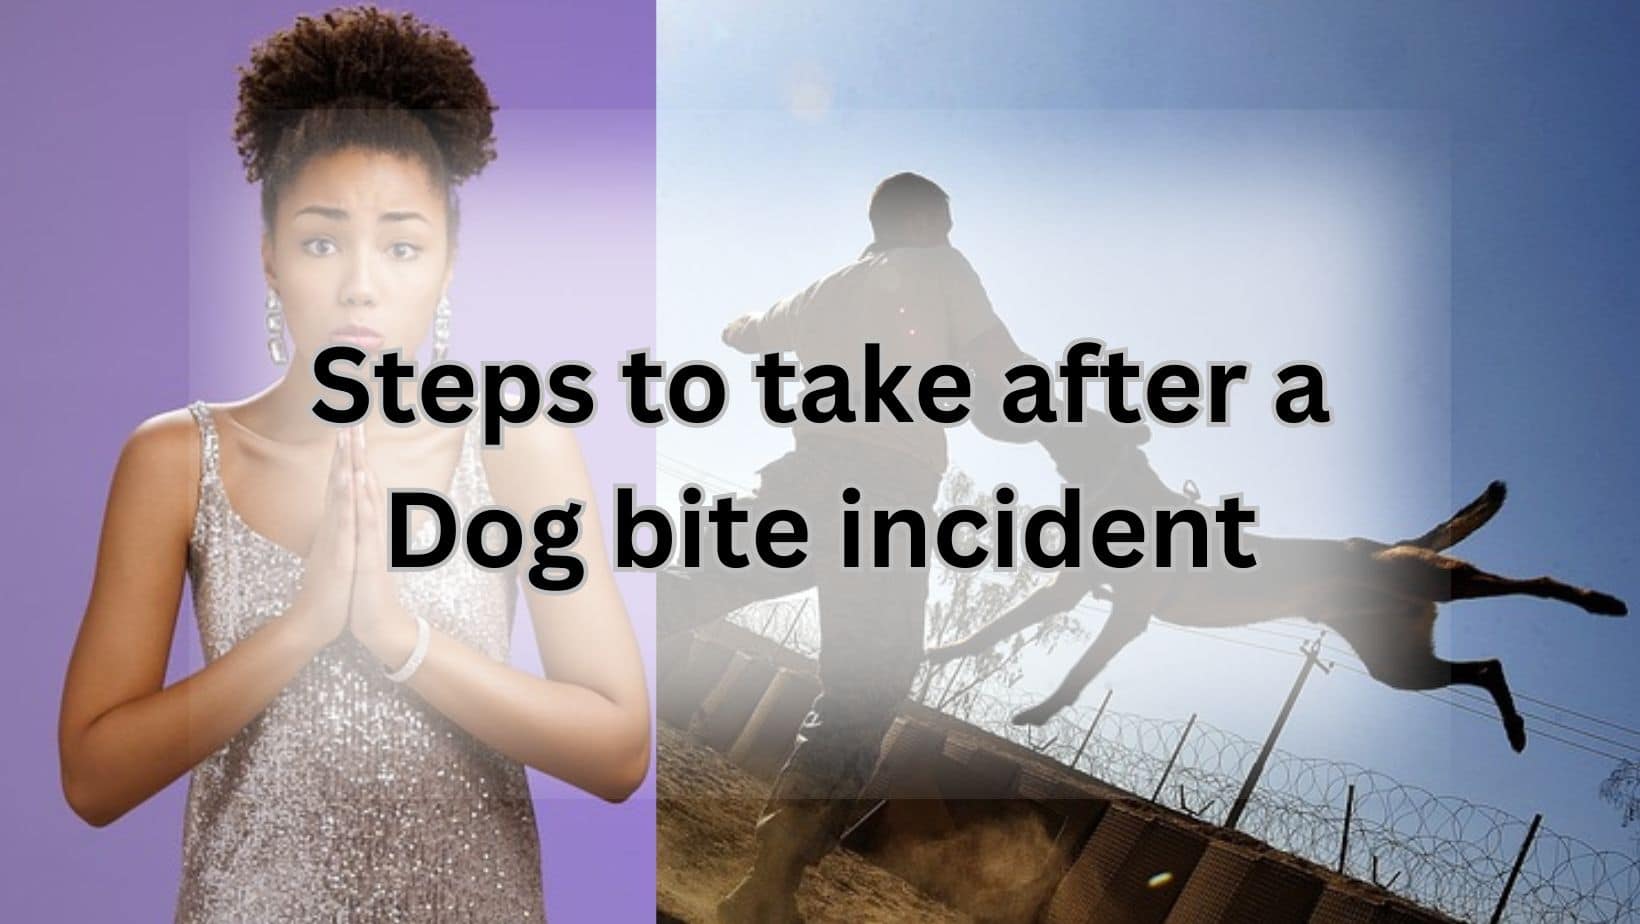 How to Apologize After Your Dog Bites - Expert Tips!